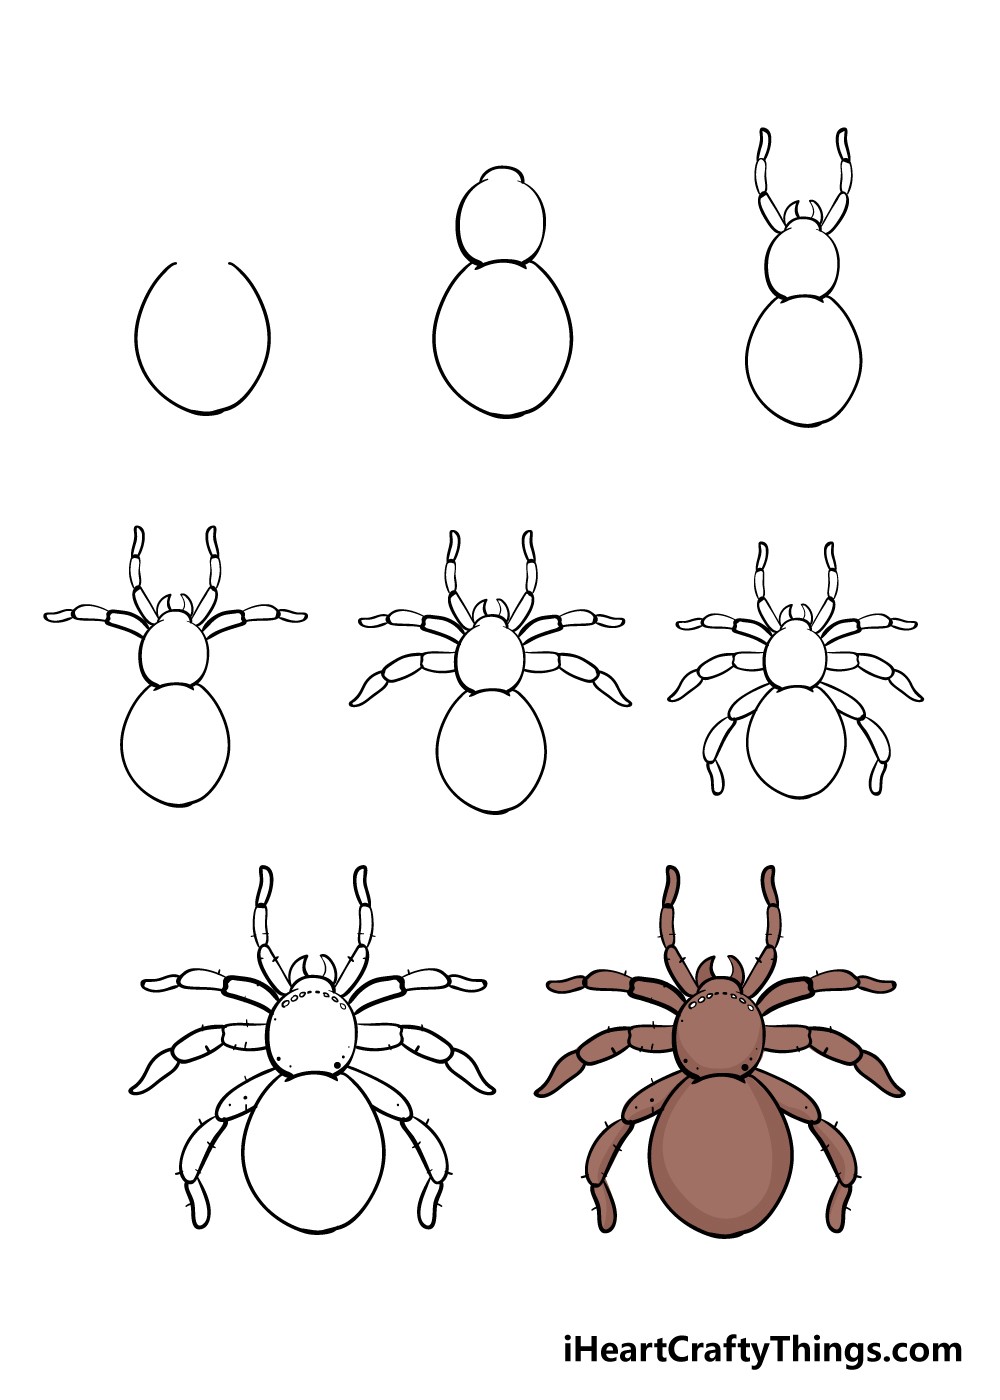 A cute spider Drawing Ideas